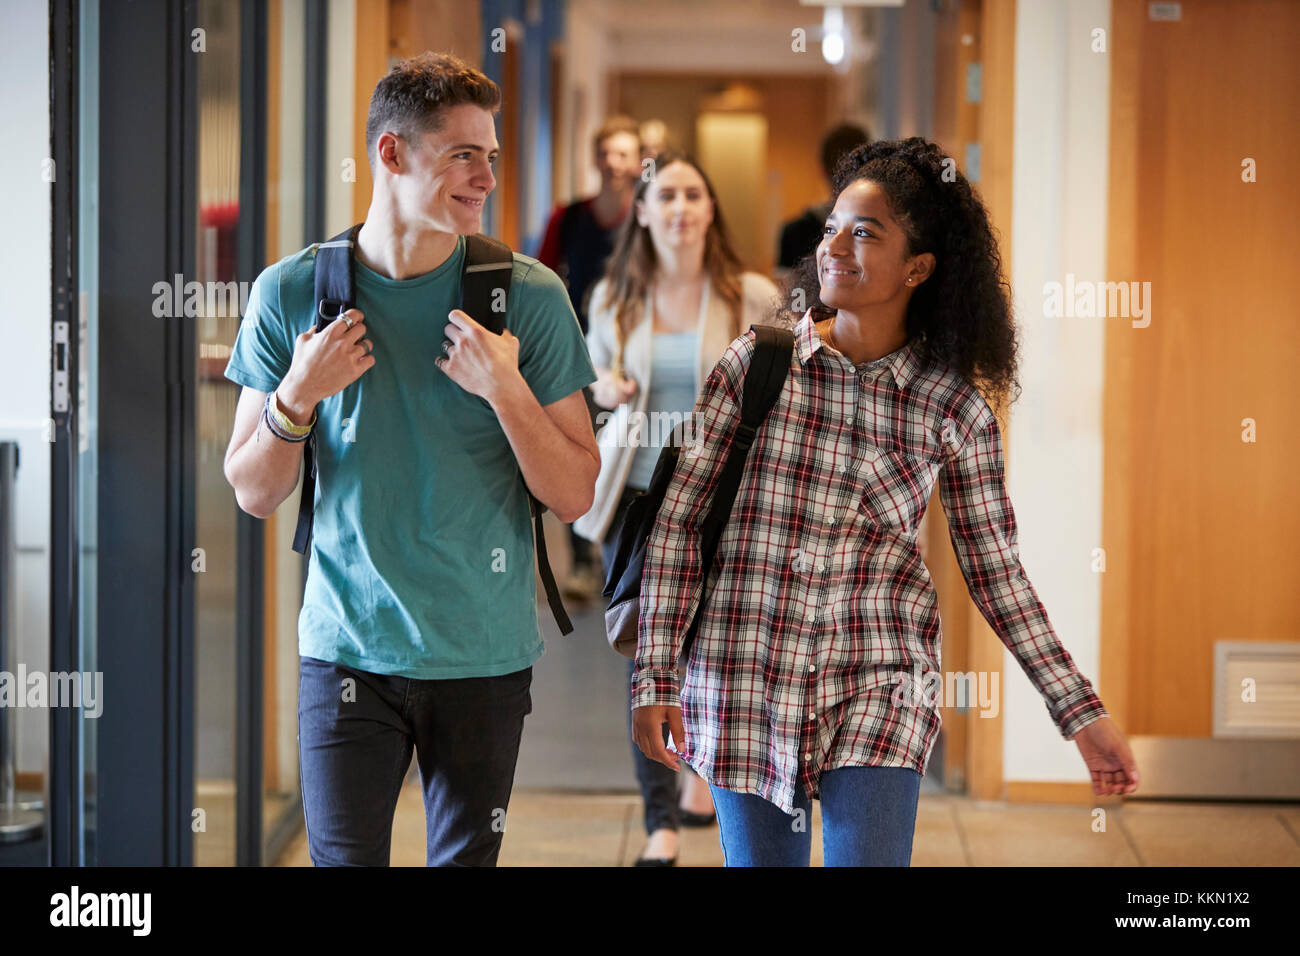 Group Of College Students Walking Through College Corridor Stock Photo